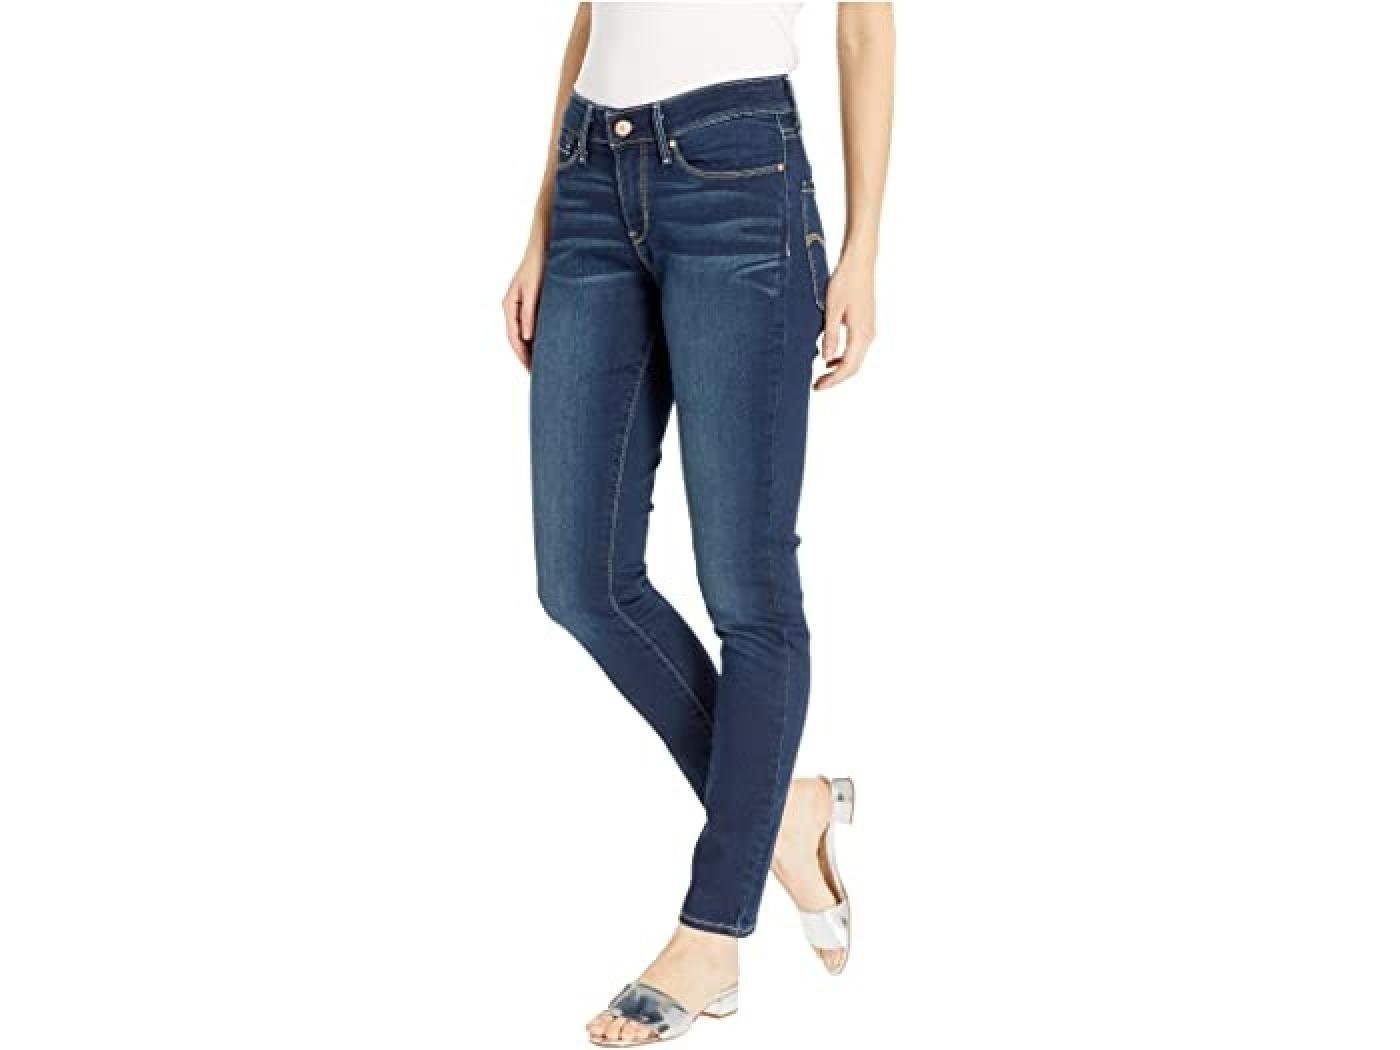 Signature by Levi Strauss & Co. Women's Gold Label Modern Skinny Jeans